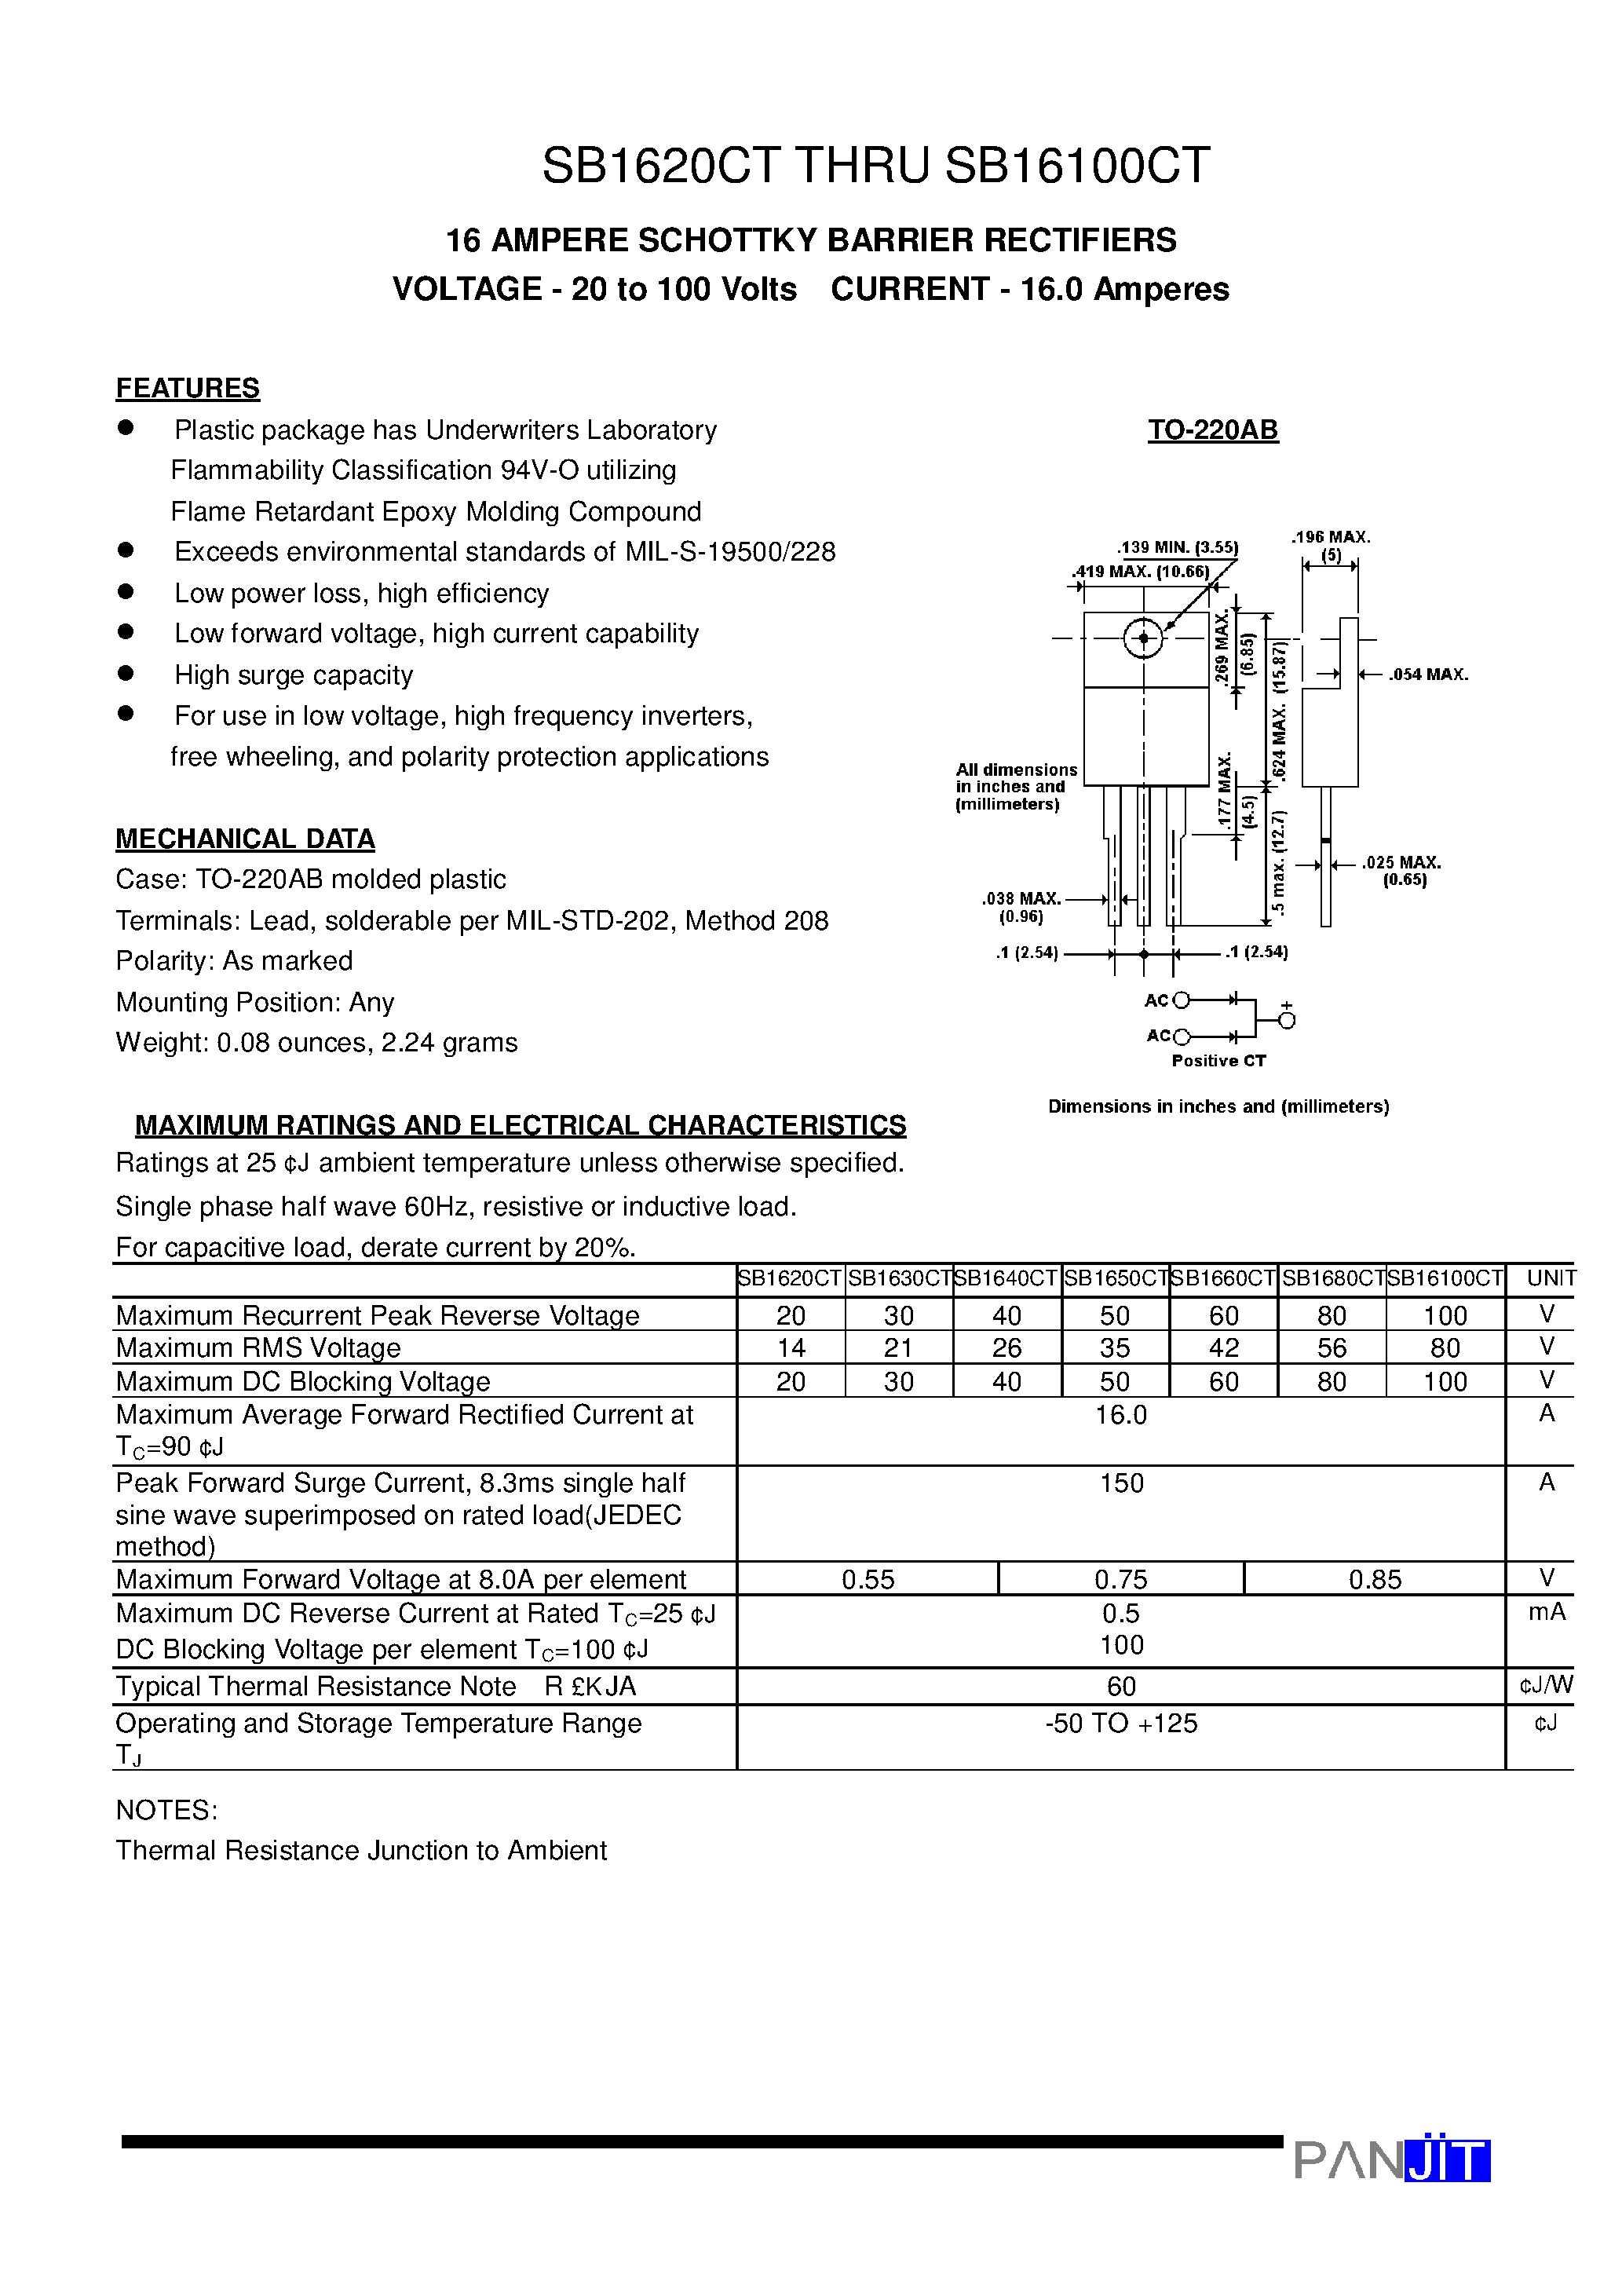 Datasheet SB1680CT - 16 AMPERE SCHOTTKY BARRIER RECTIFIERS(VOLTAGE - 20 to 100 Volts CURRENT - 16.0 Amperes) page 1